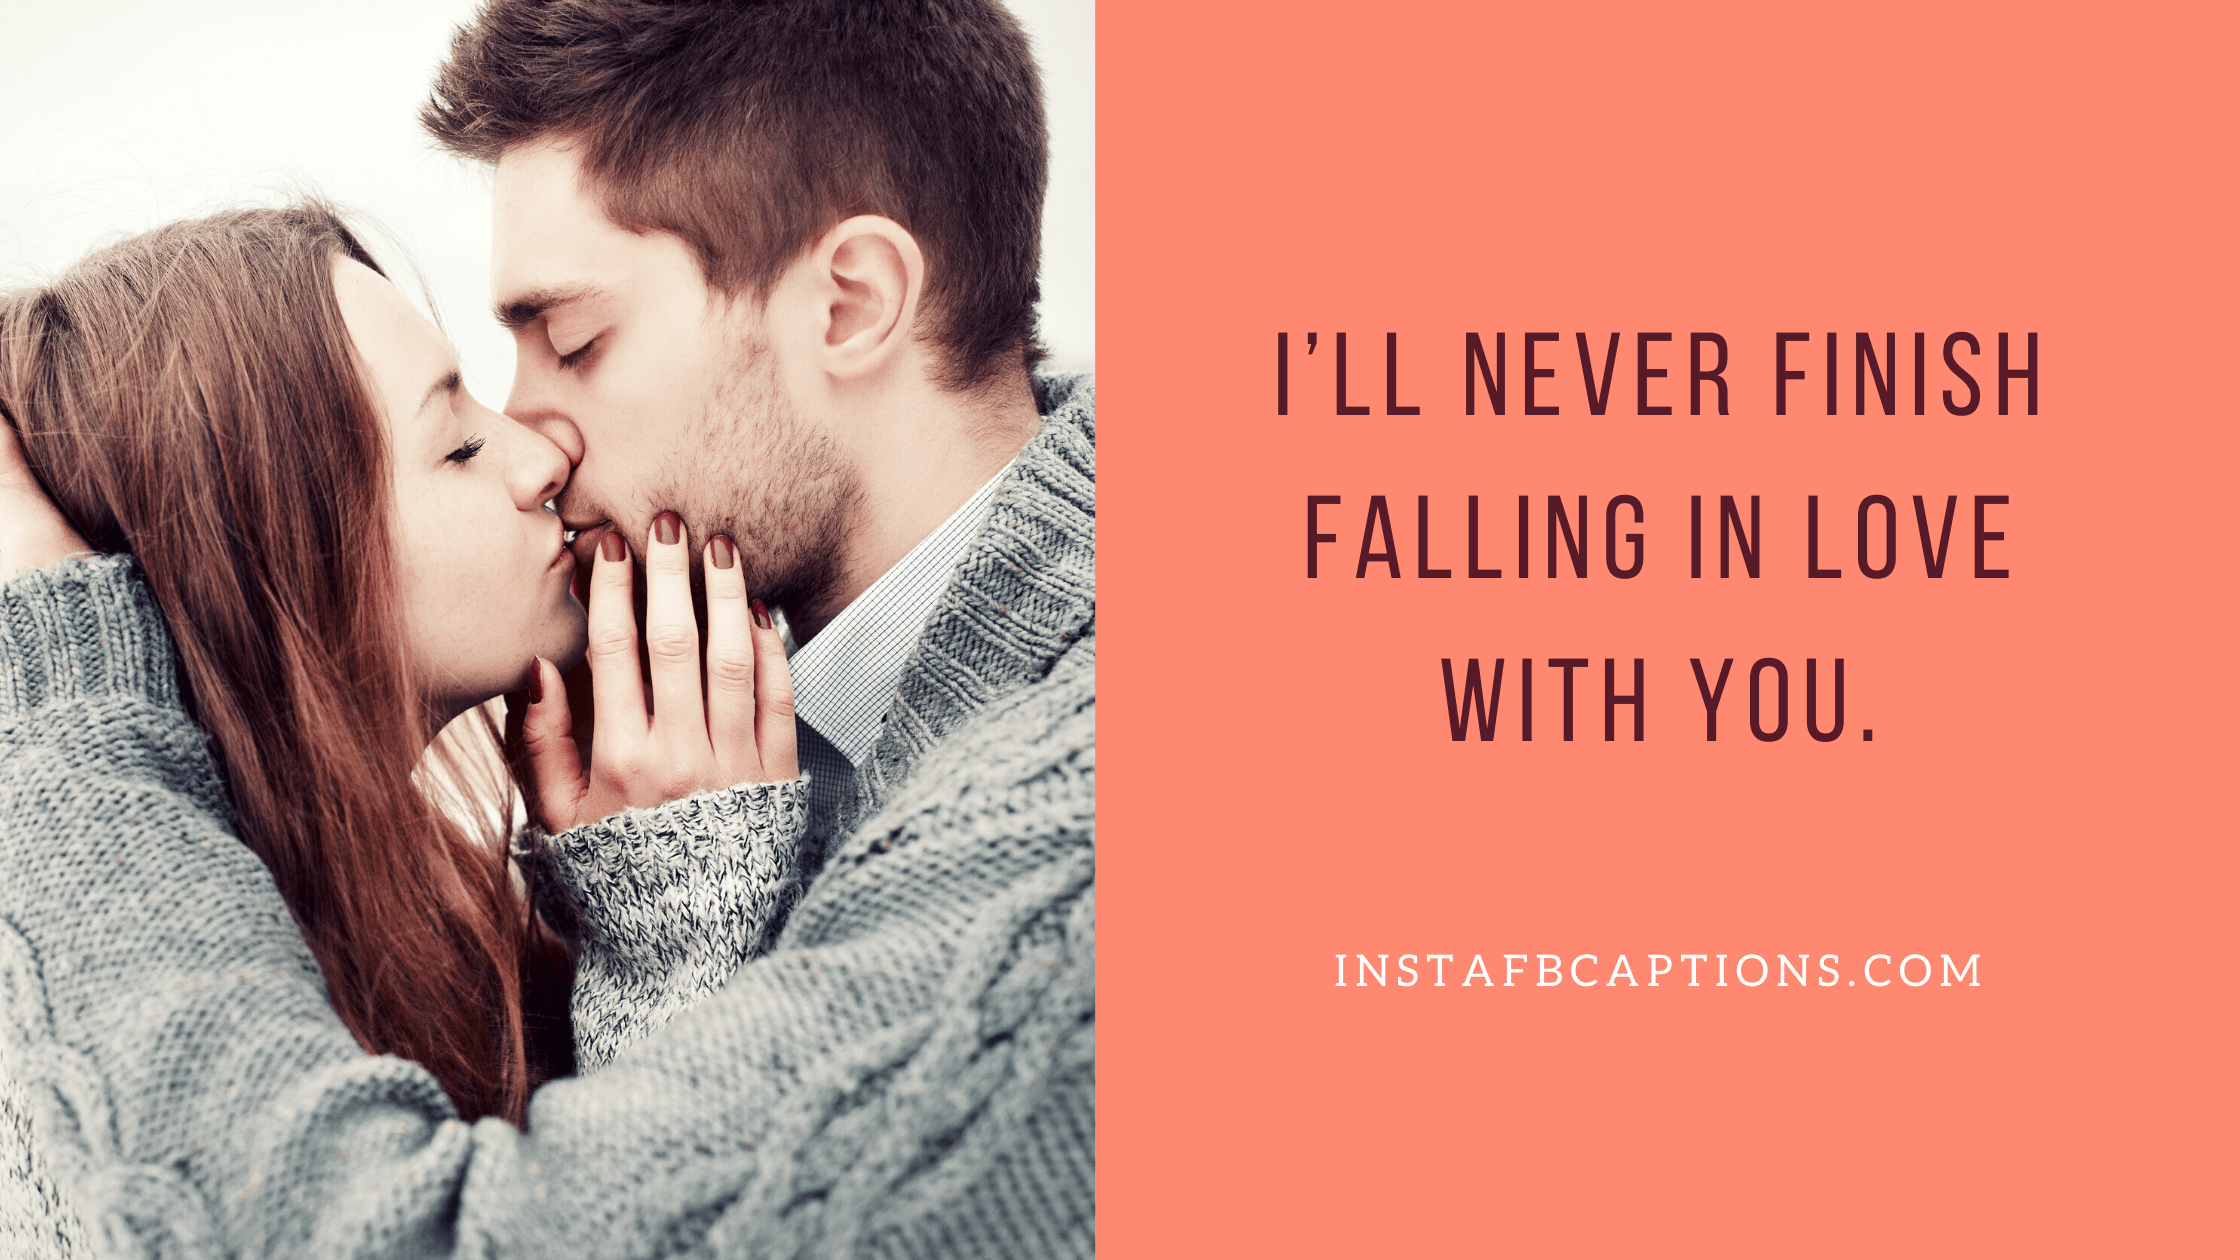 I'll never finish falling in love with you  - Love Captions for your Boyfriend - [New] Captions For Boyfriend Instagram Pictures 2023